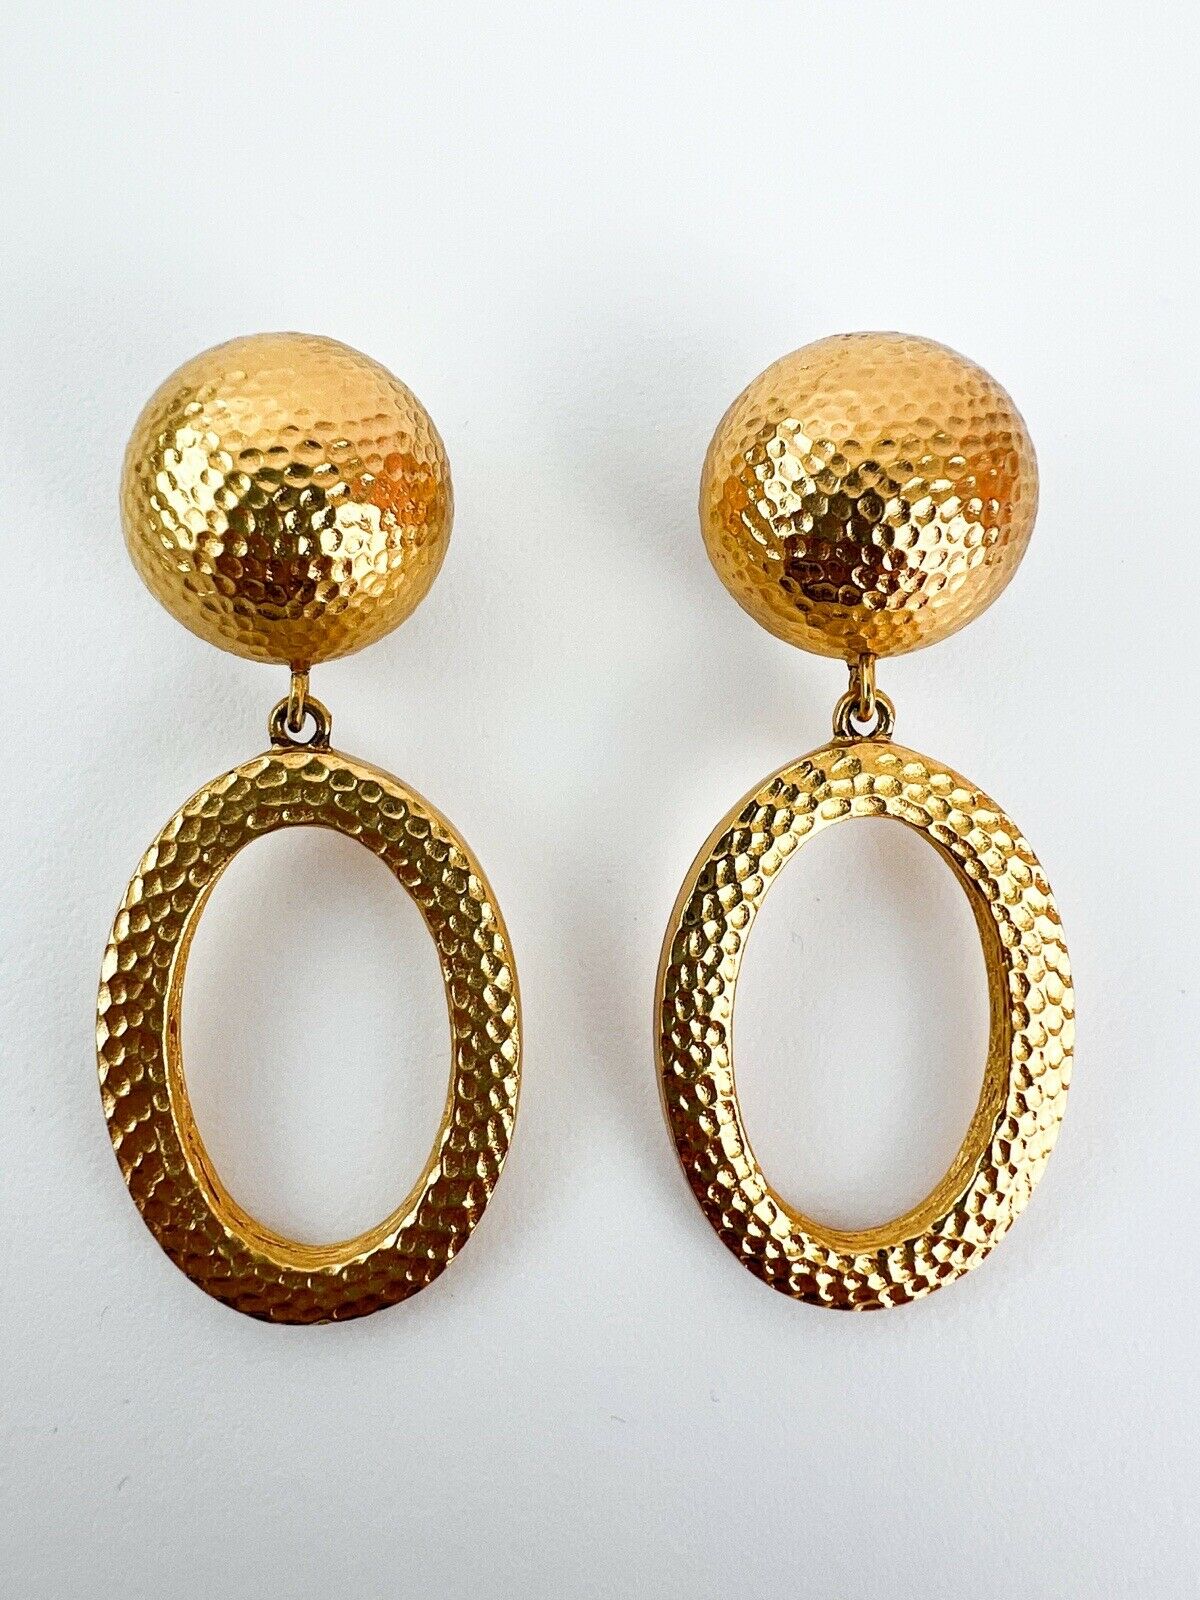 【SOLD OUT】Christian Dior Germany Vintage Clip on Hoop Earrings Dangle Drop Gold Tone